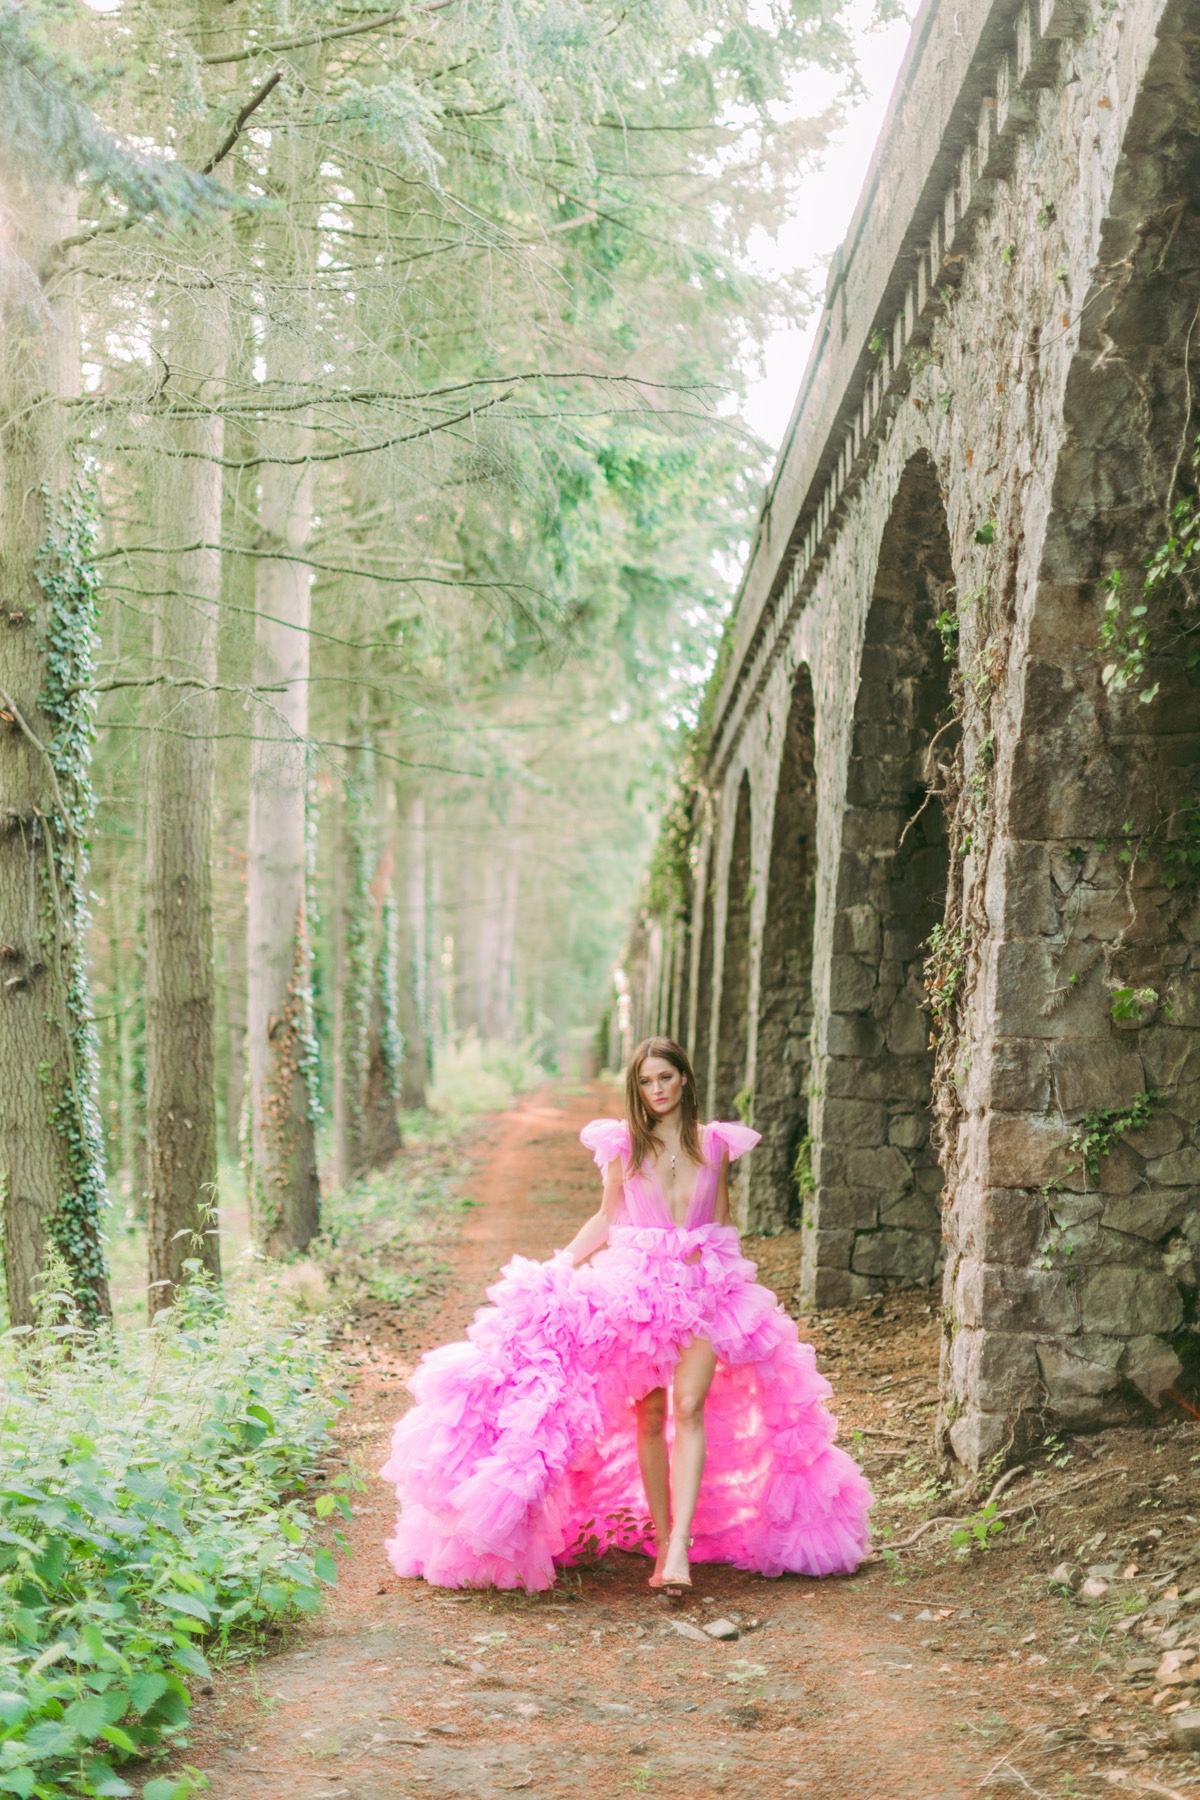 A French Castle Garden Party in Millenial Pink